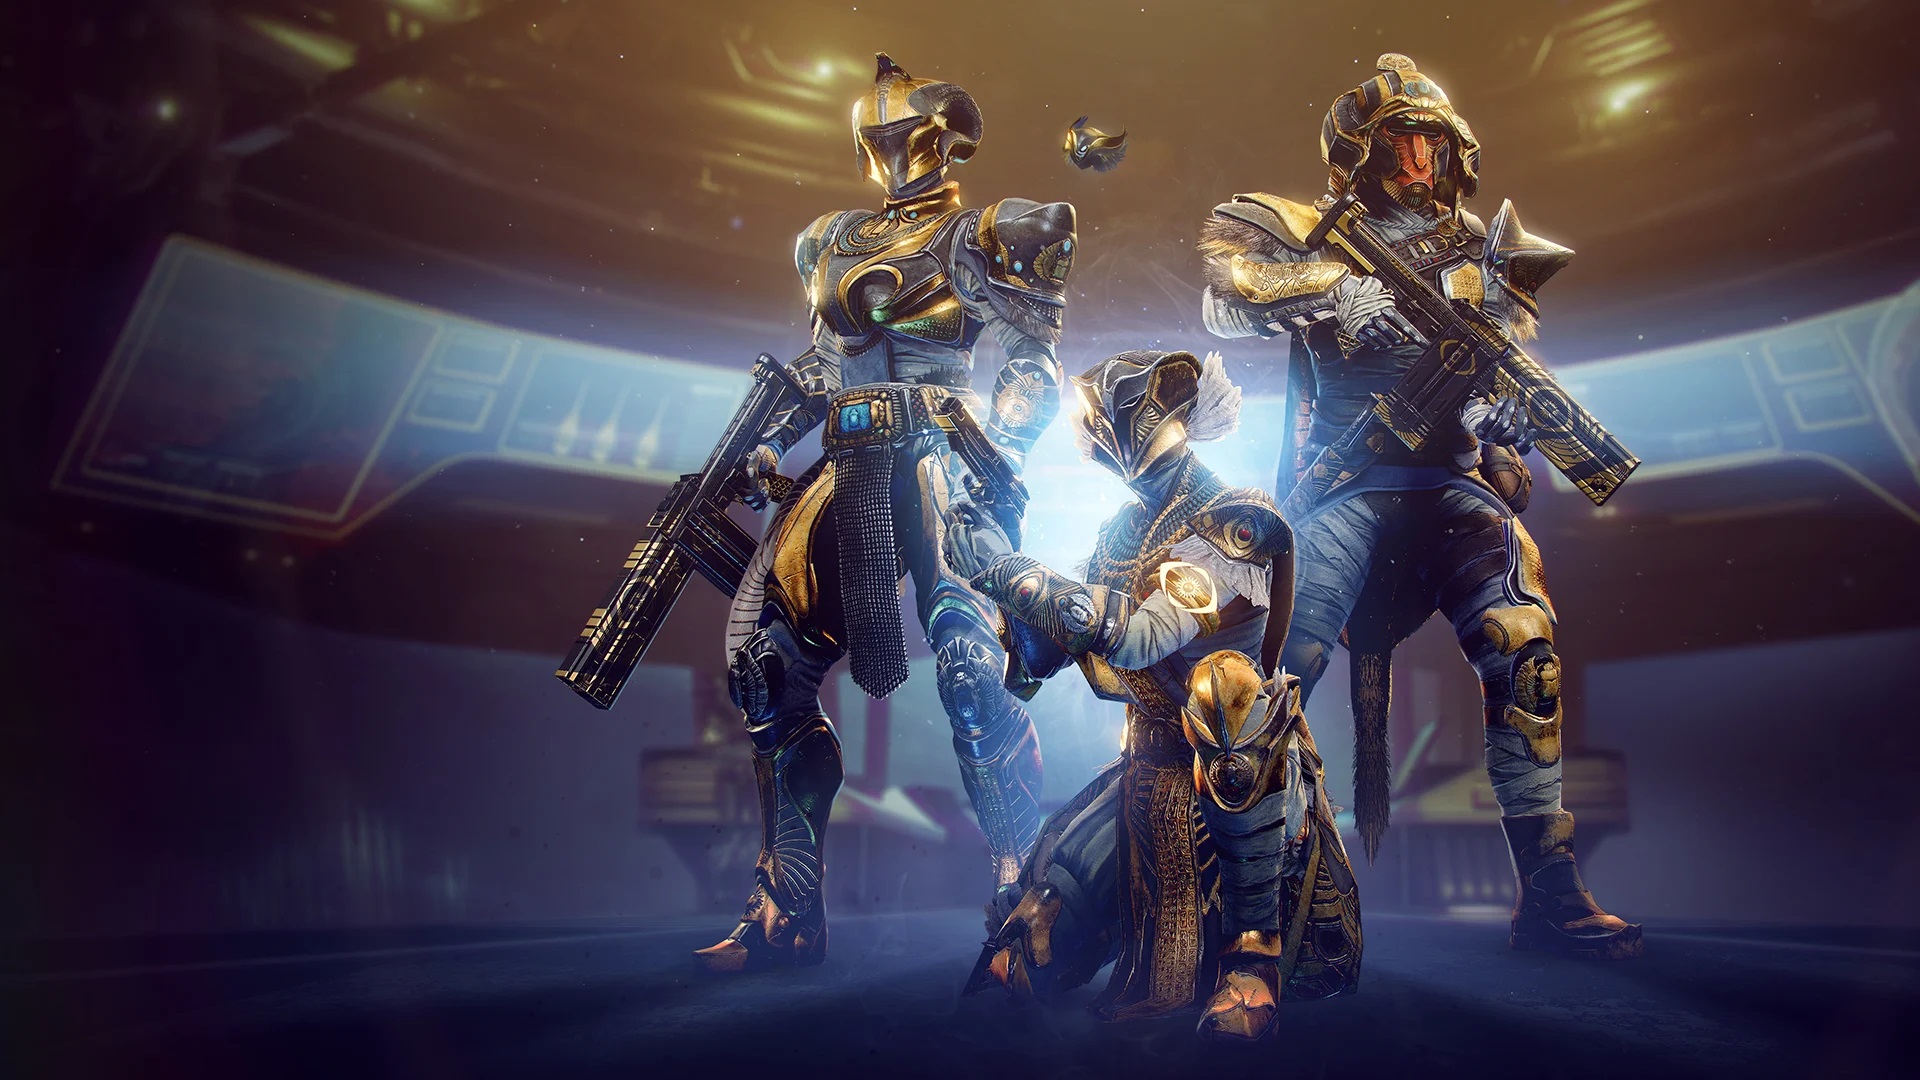 Destiny 2 Freelance Trials of Osiris may become permanent